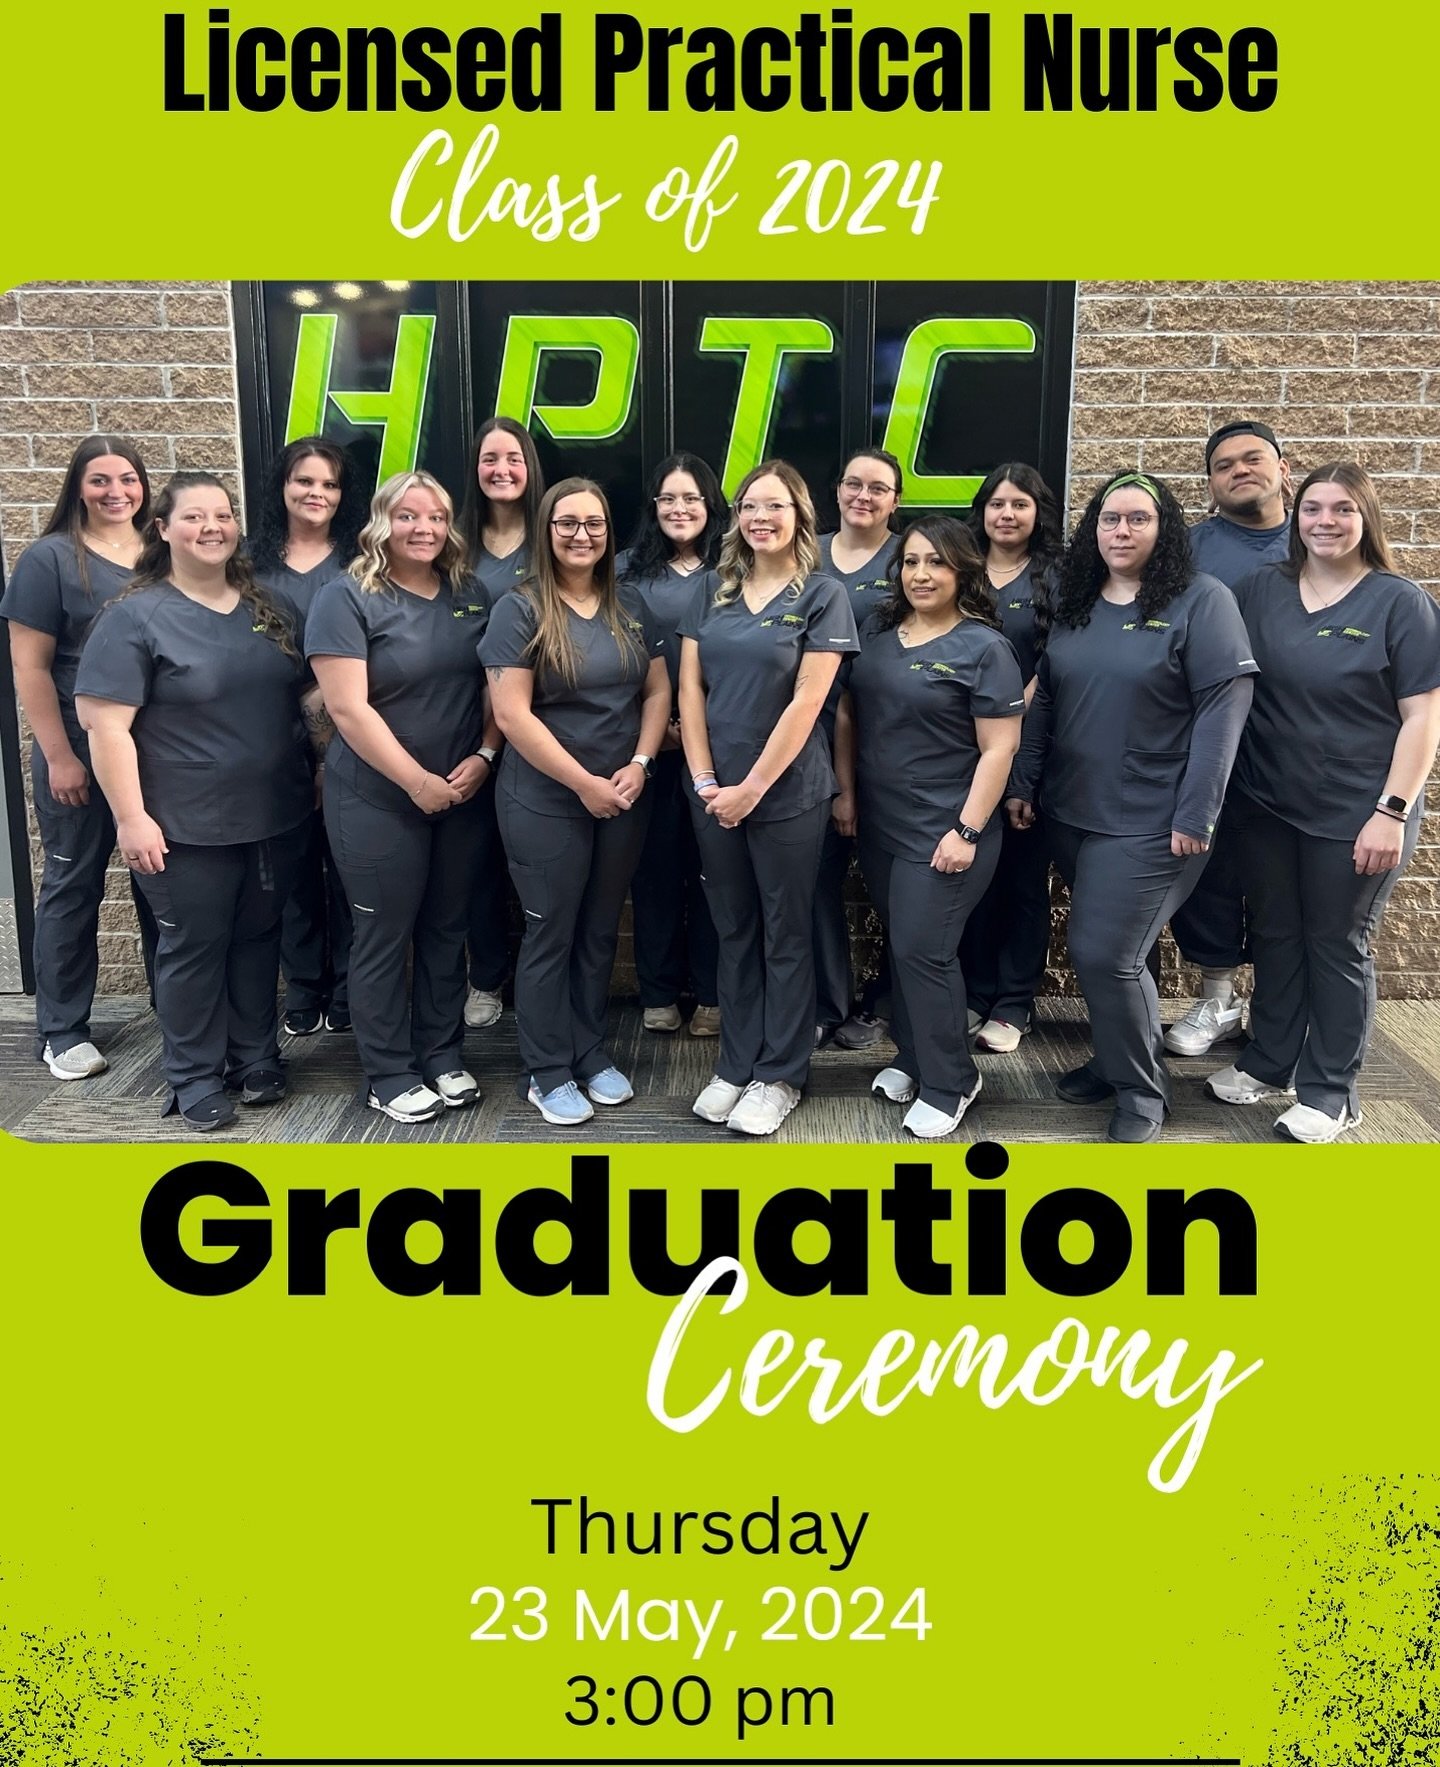 As Nurses Week continues, we look forward to celebrating the graduation of our 2024 Licensed Practical Nursing Class on May 23rd!

Applications for the upcoming LPN class starting in August are still open for submission. The deadline for applications